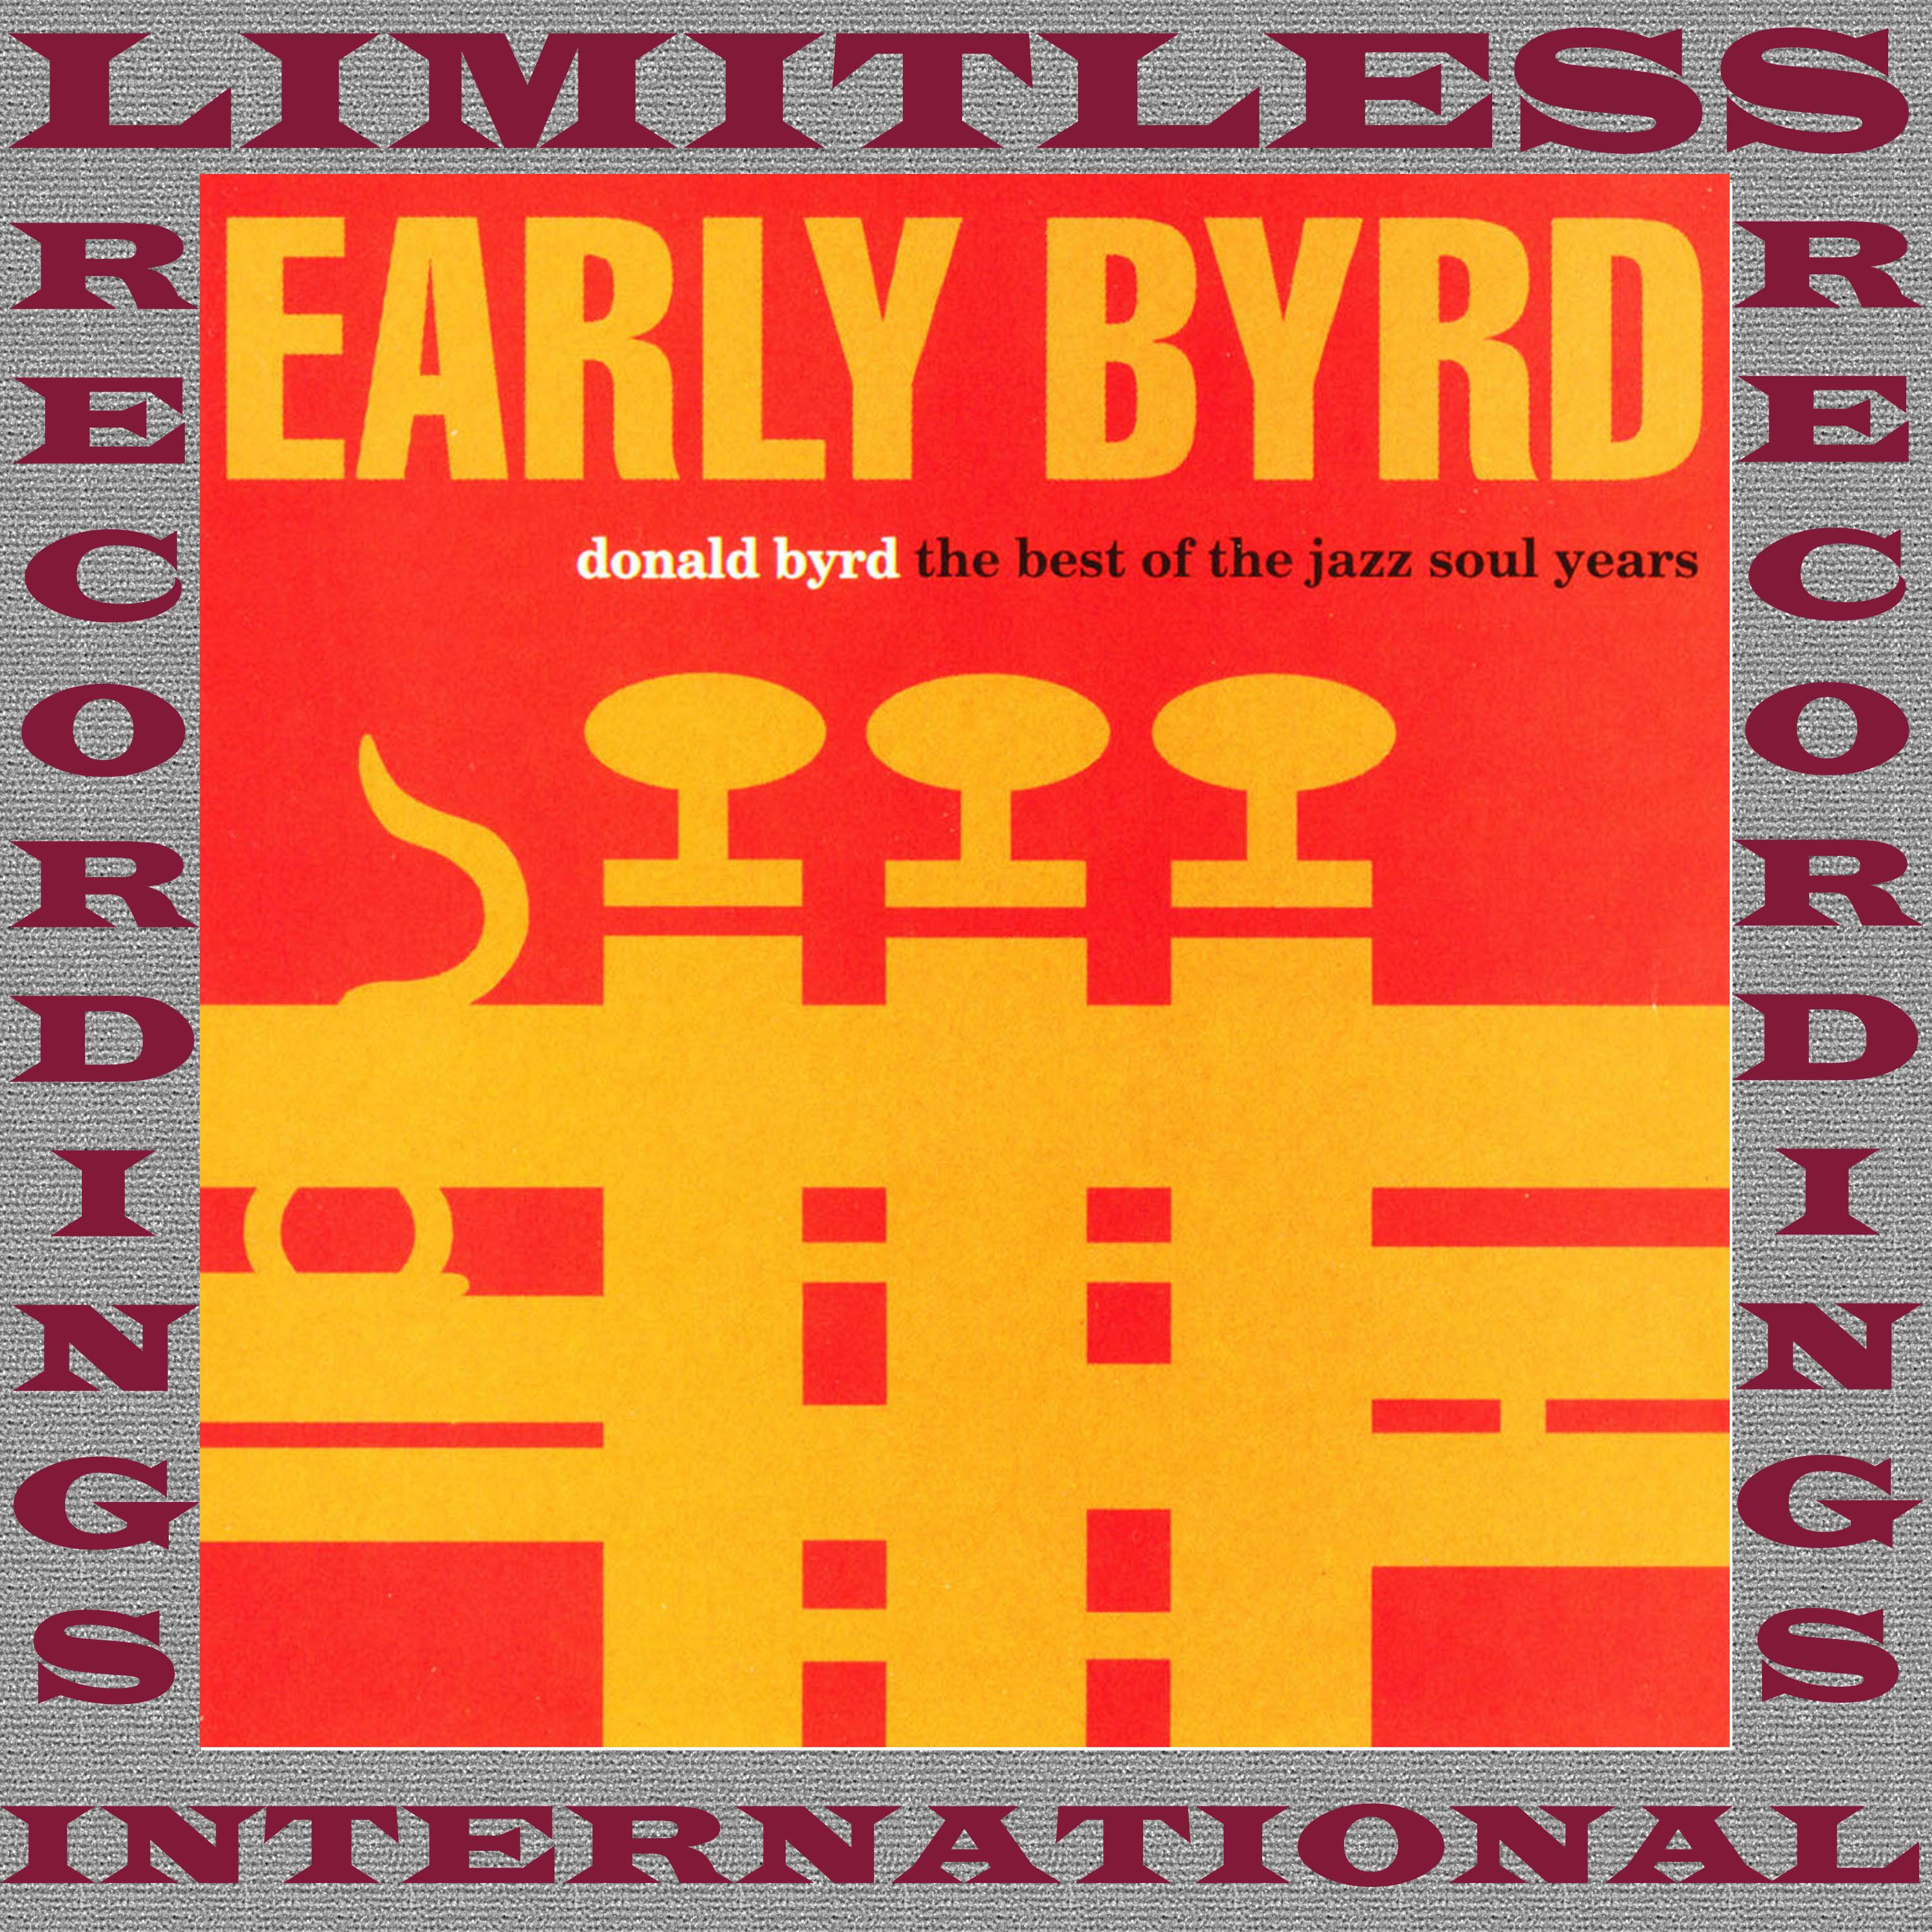 Early Byrd, The Best Of The Jazz Soul Years (Remastered Version)